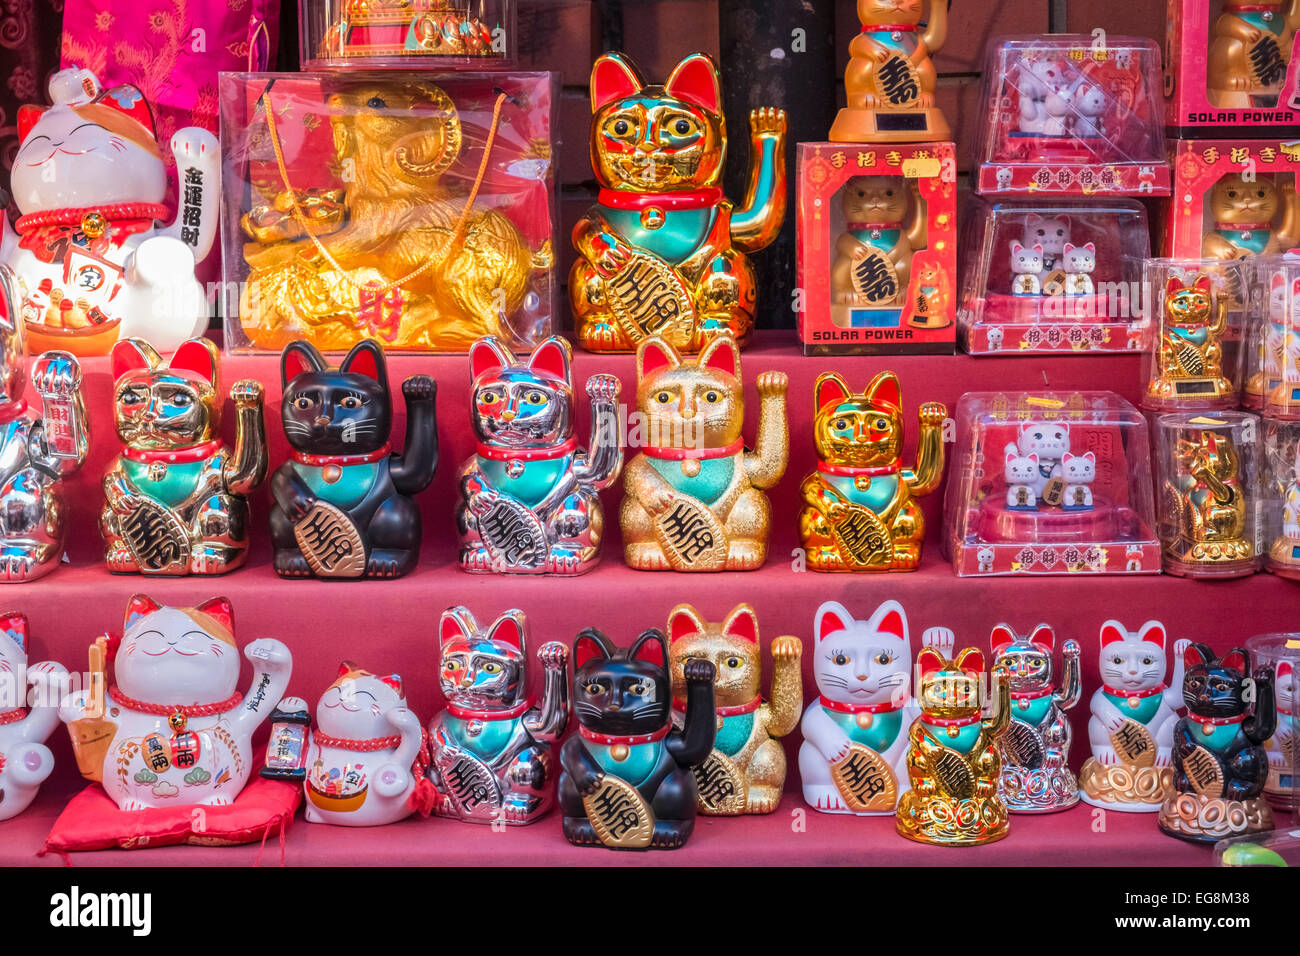 lucky cat store